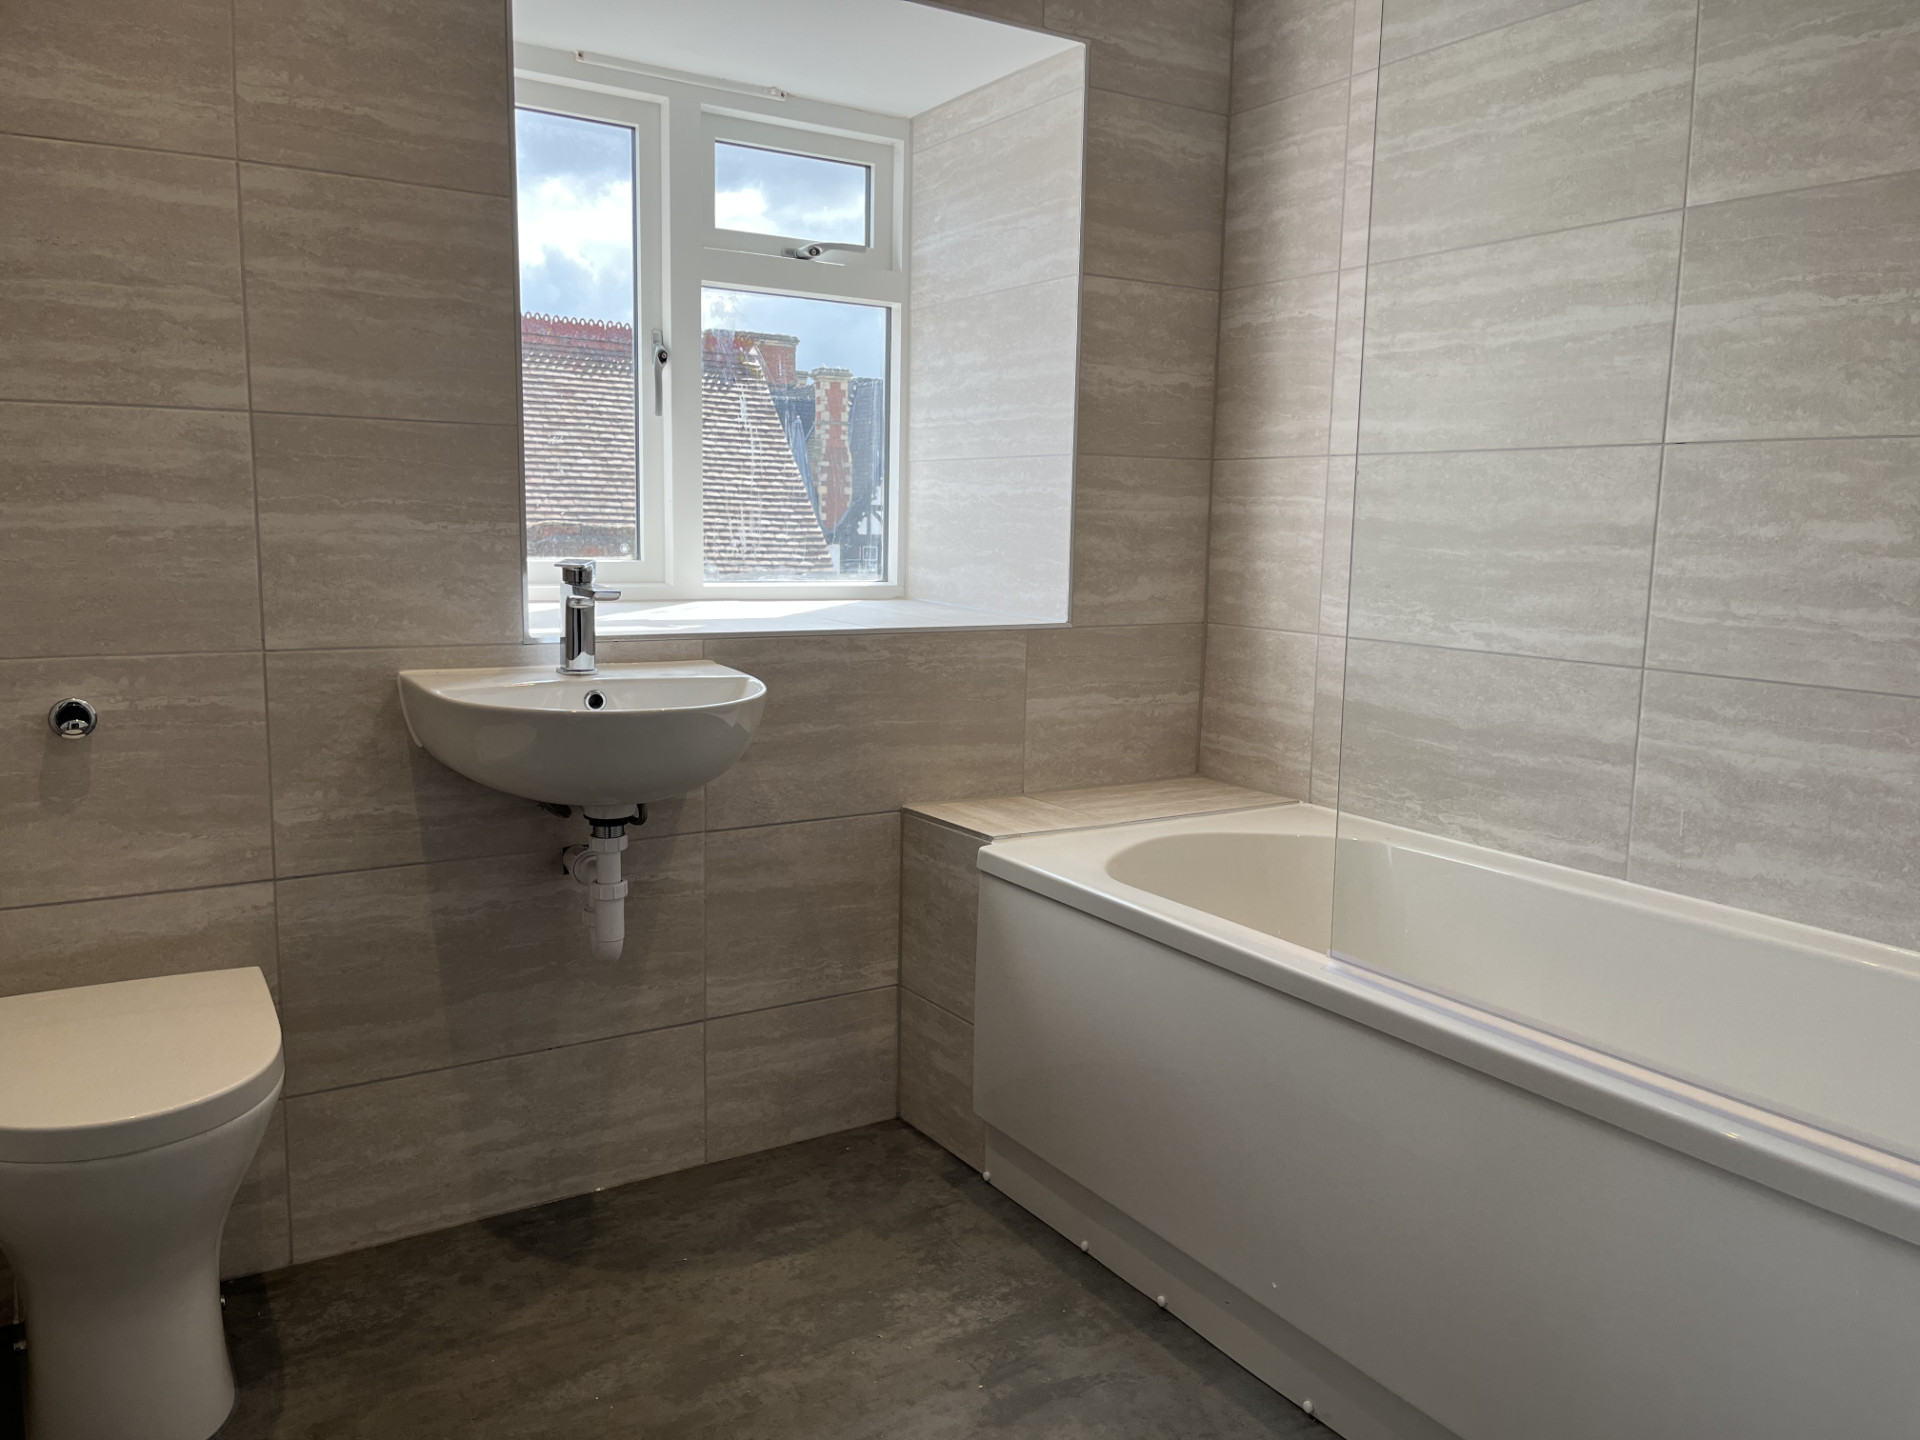 Penthouse bathroom at 19 Eastgate, Chester, Cheshire, 2023